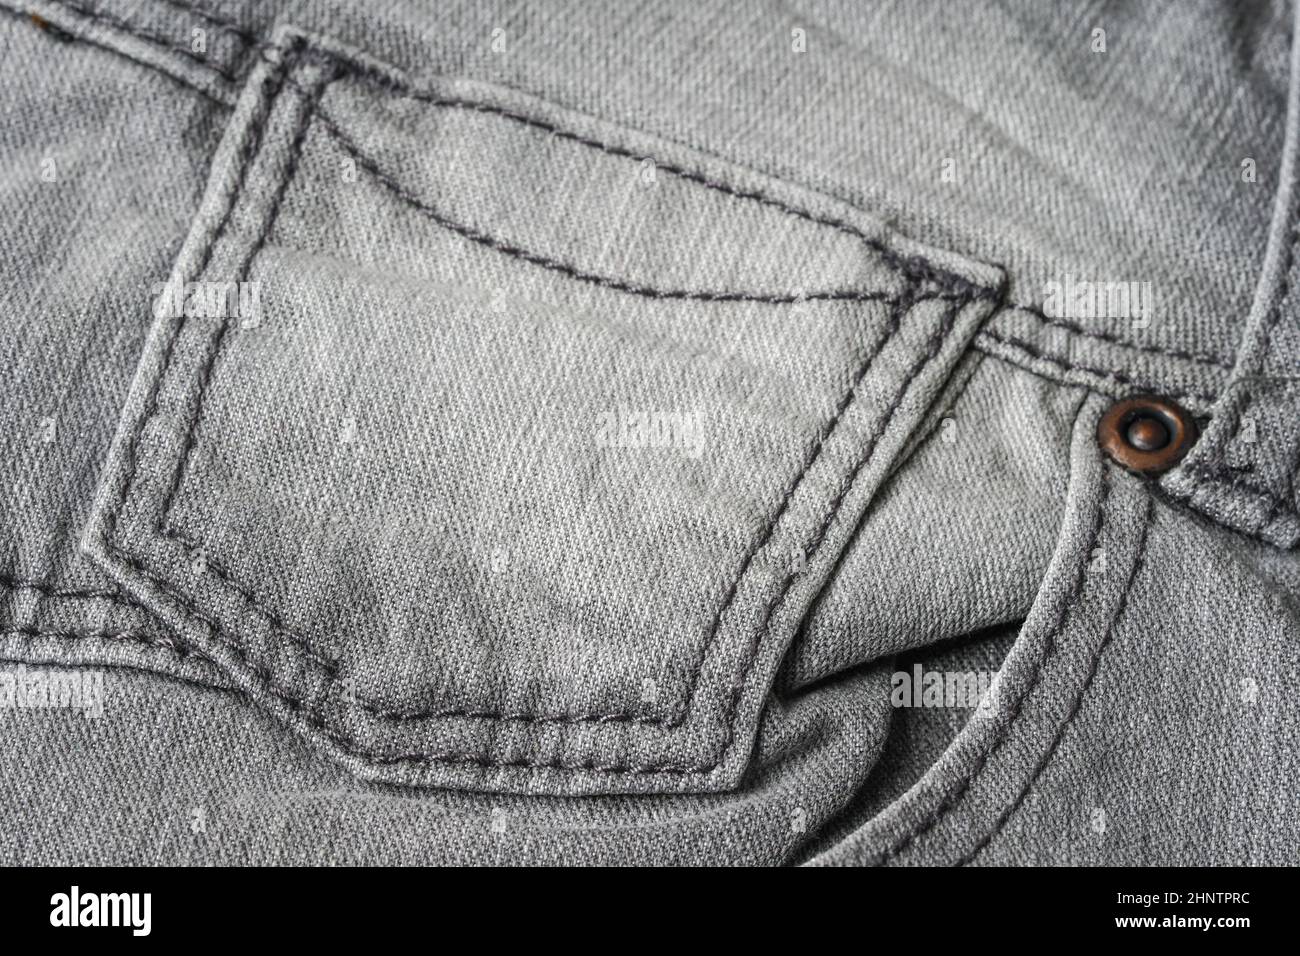 denim as a texture, close-up view and background Stock Photo - Alamy